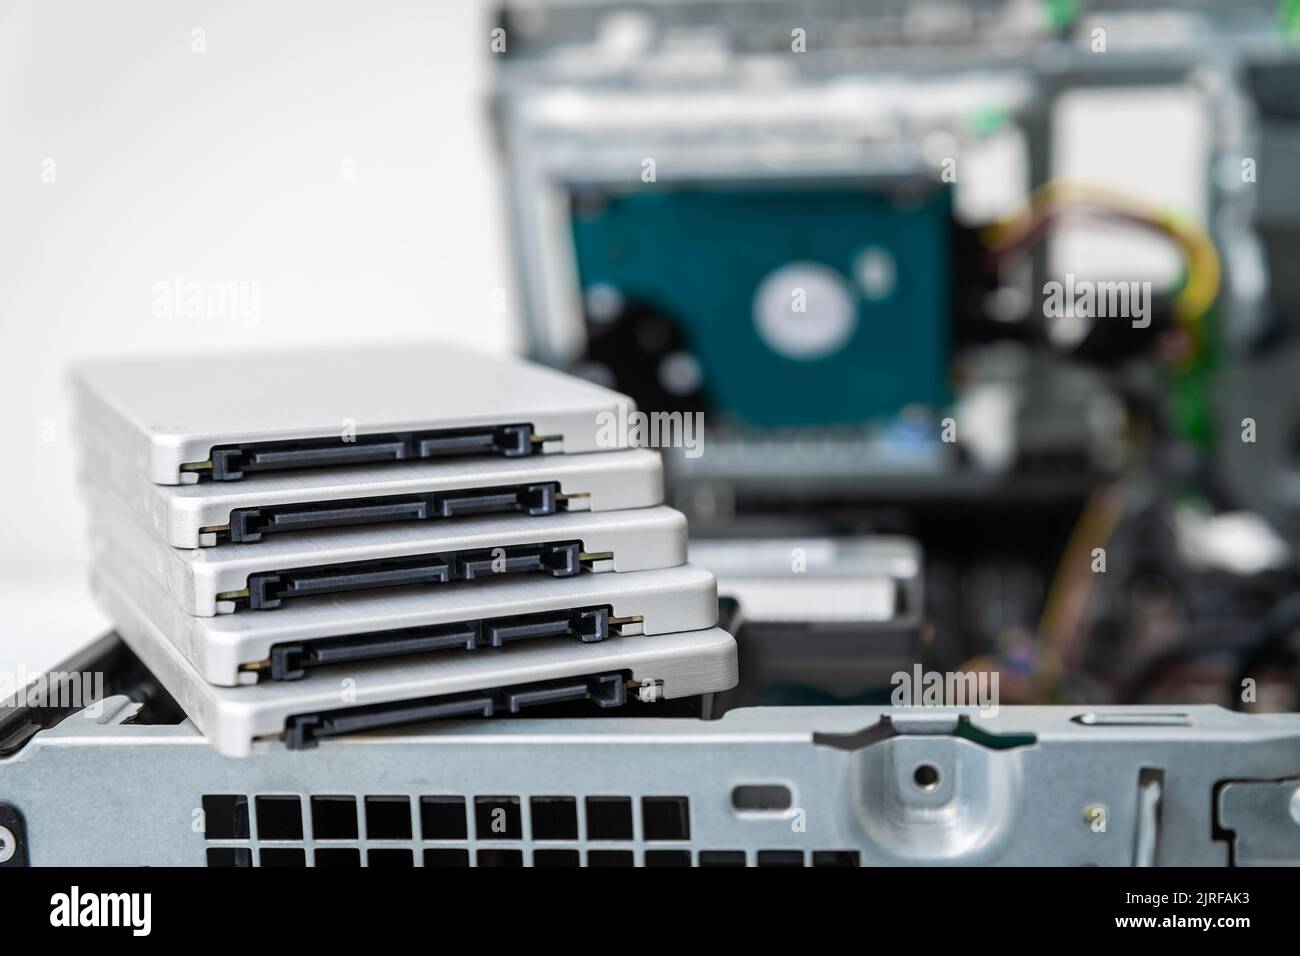 Closed-up view of SSD hard disk drives on top of business desktop PC Stock Photo